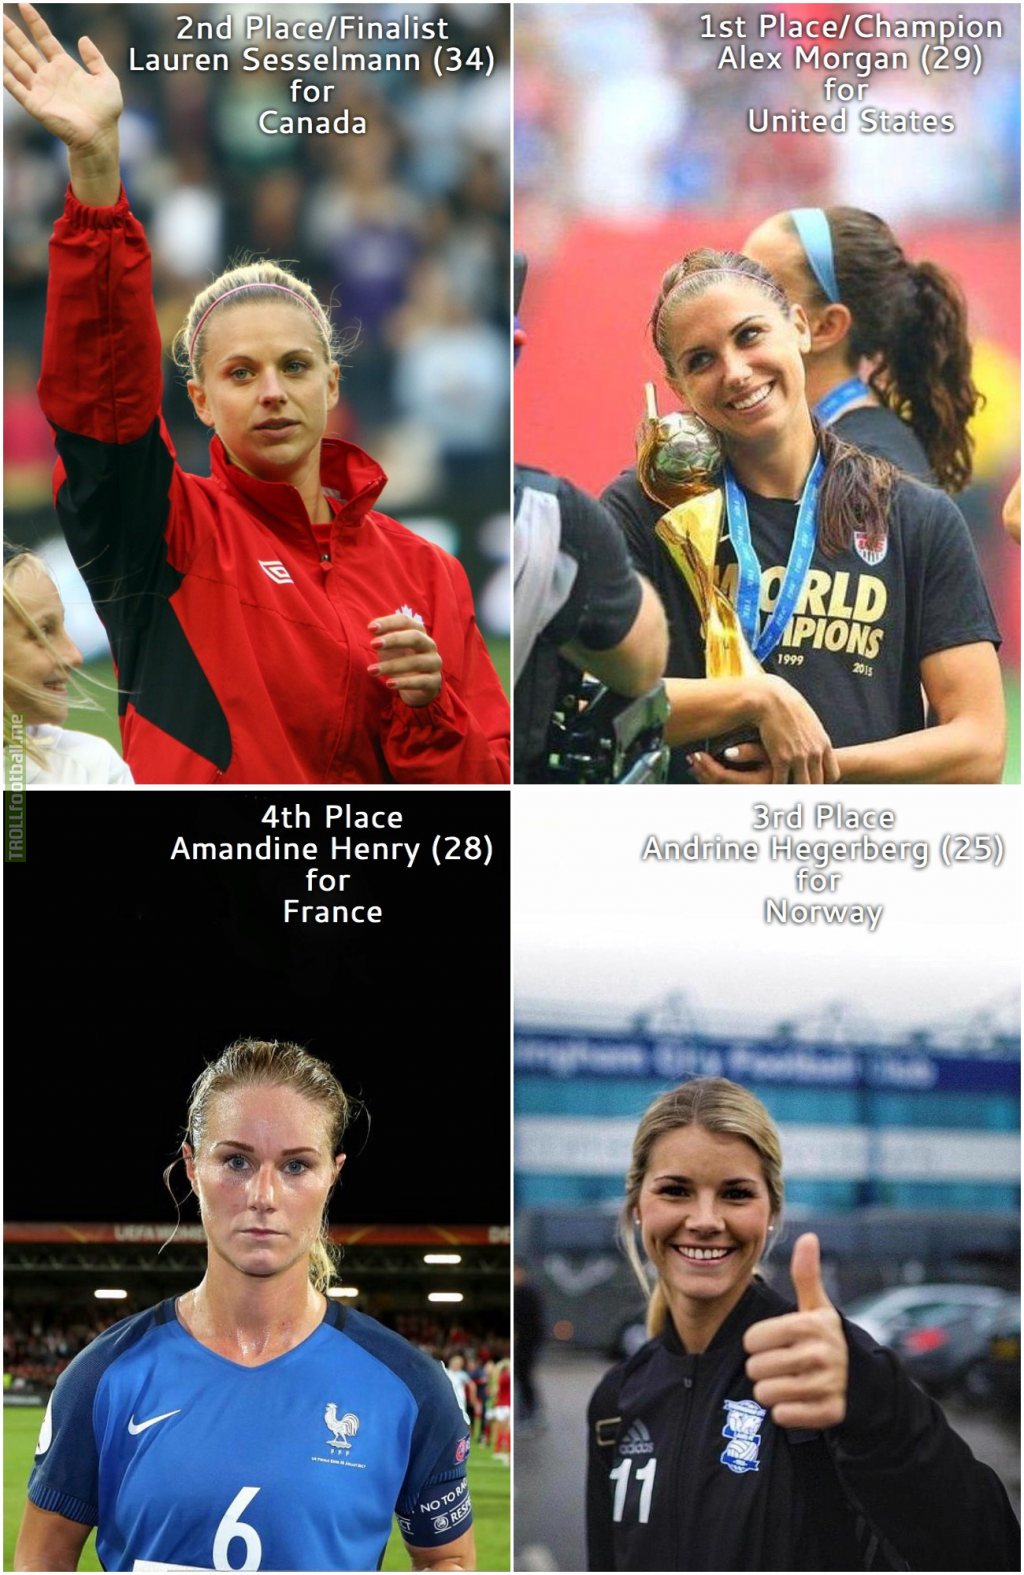 The Top 4 hottest female soccer players voted by you!